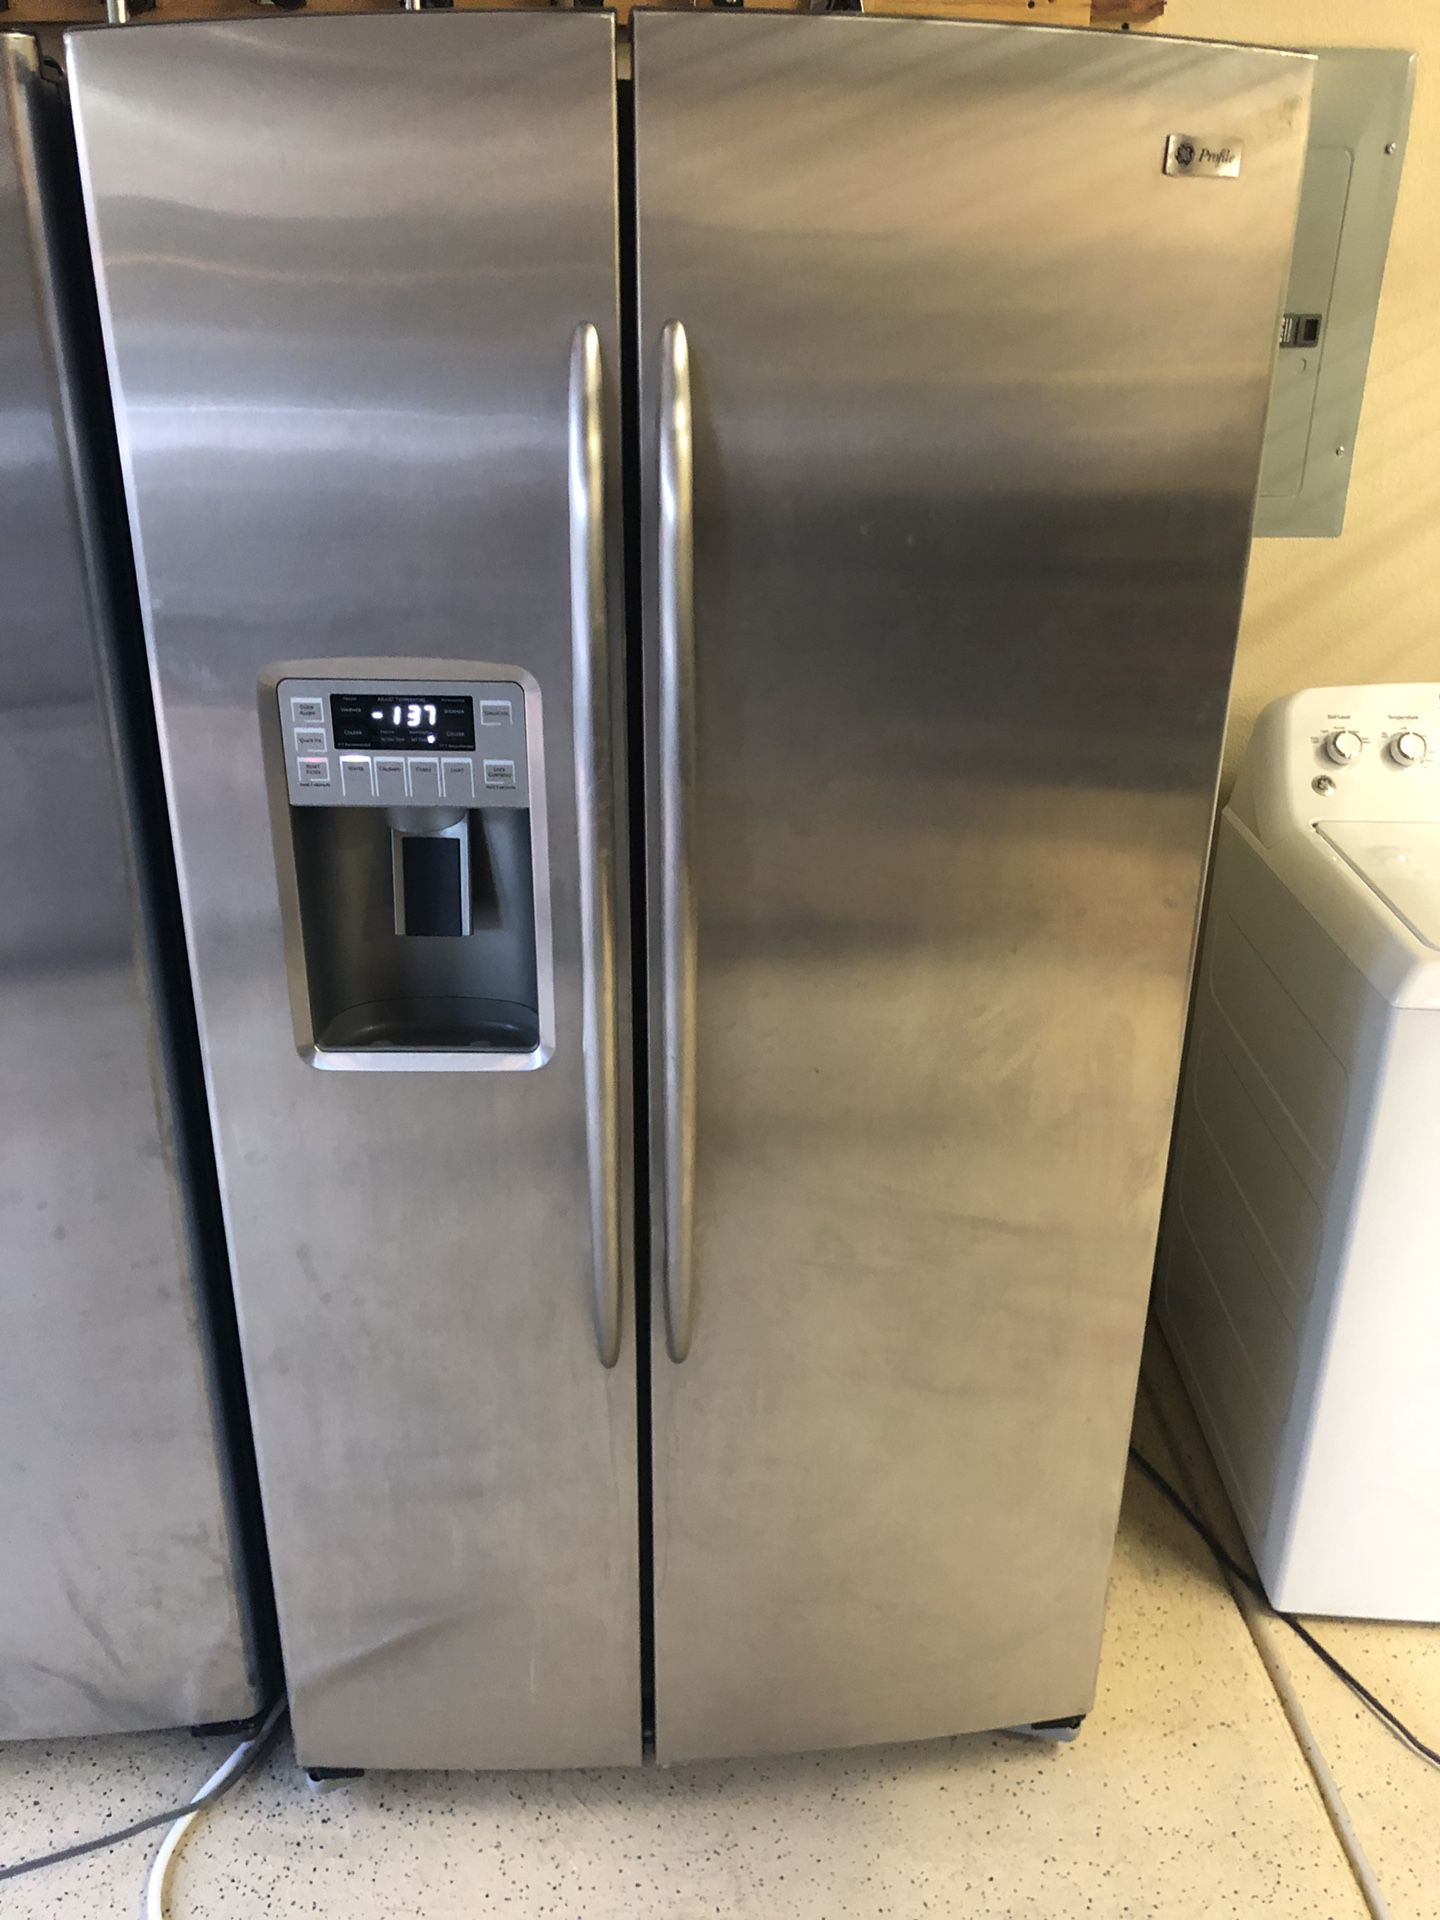 Stainless steel GE profile side by side